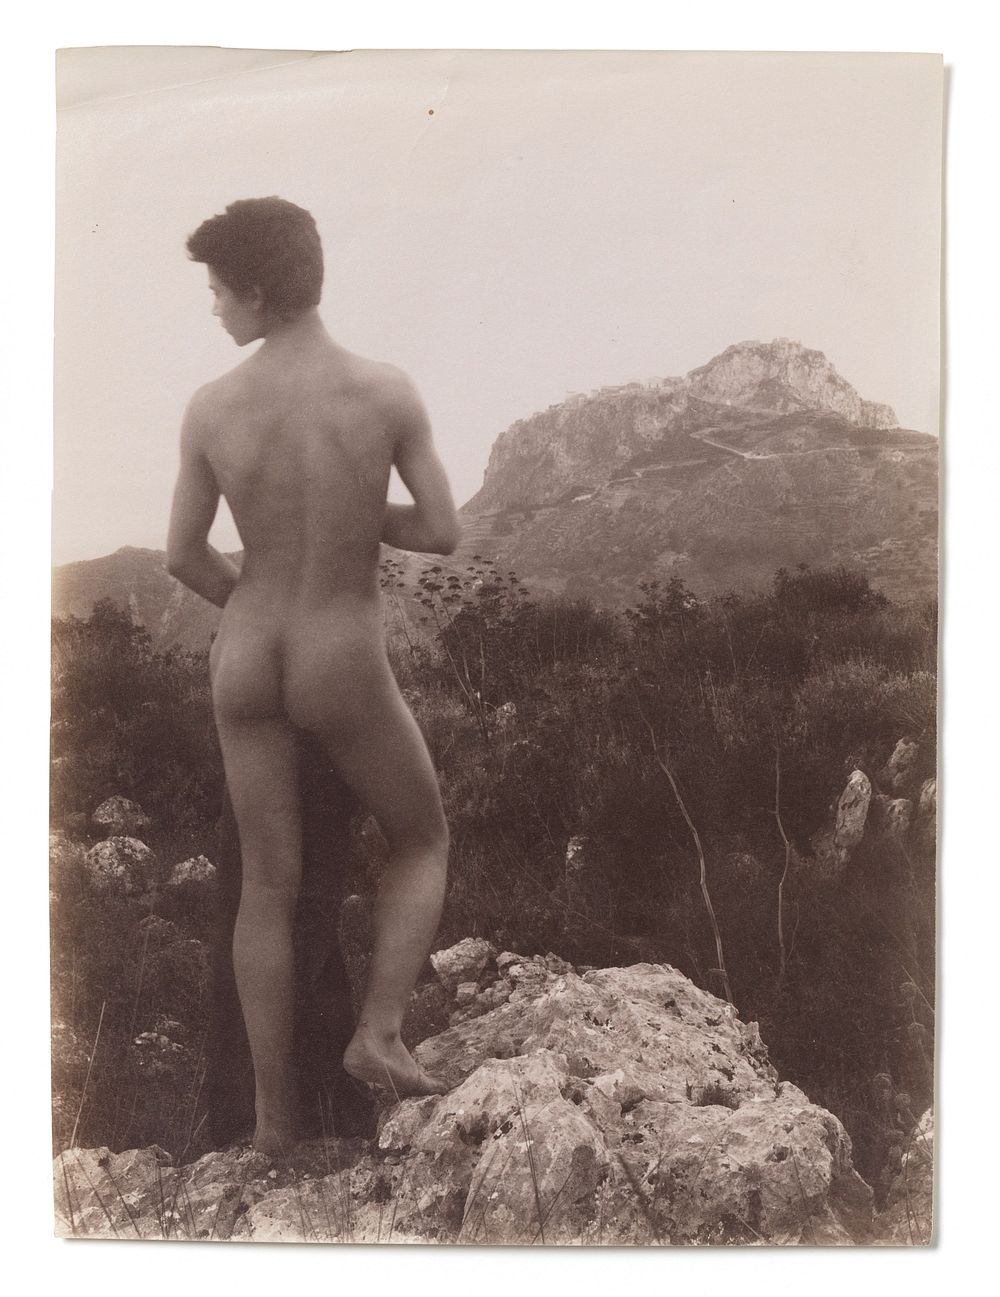 A naked Sicilian boy, in a rocky setting outdoors. Photograph, 1900, by W. von Gloeden.